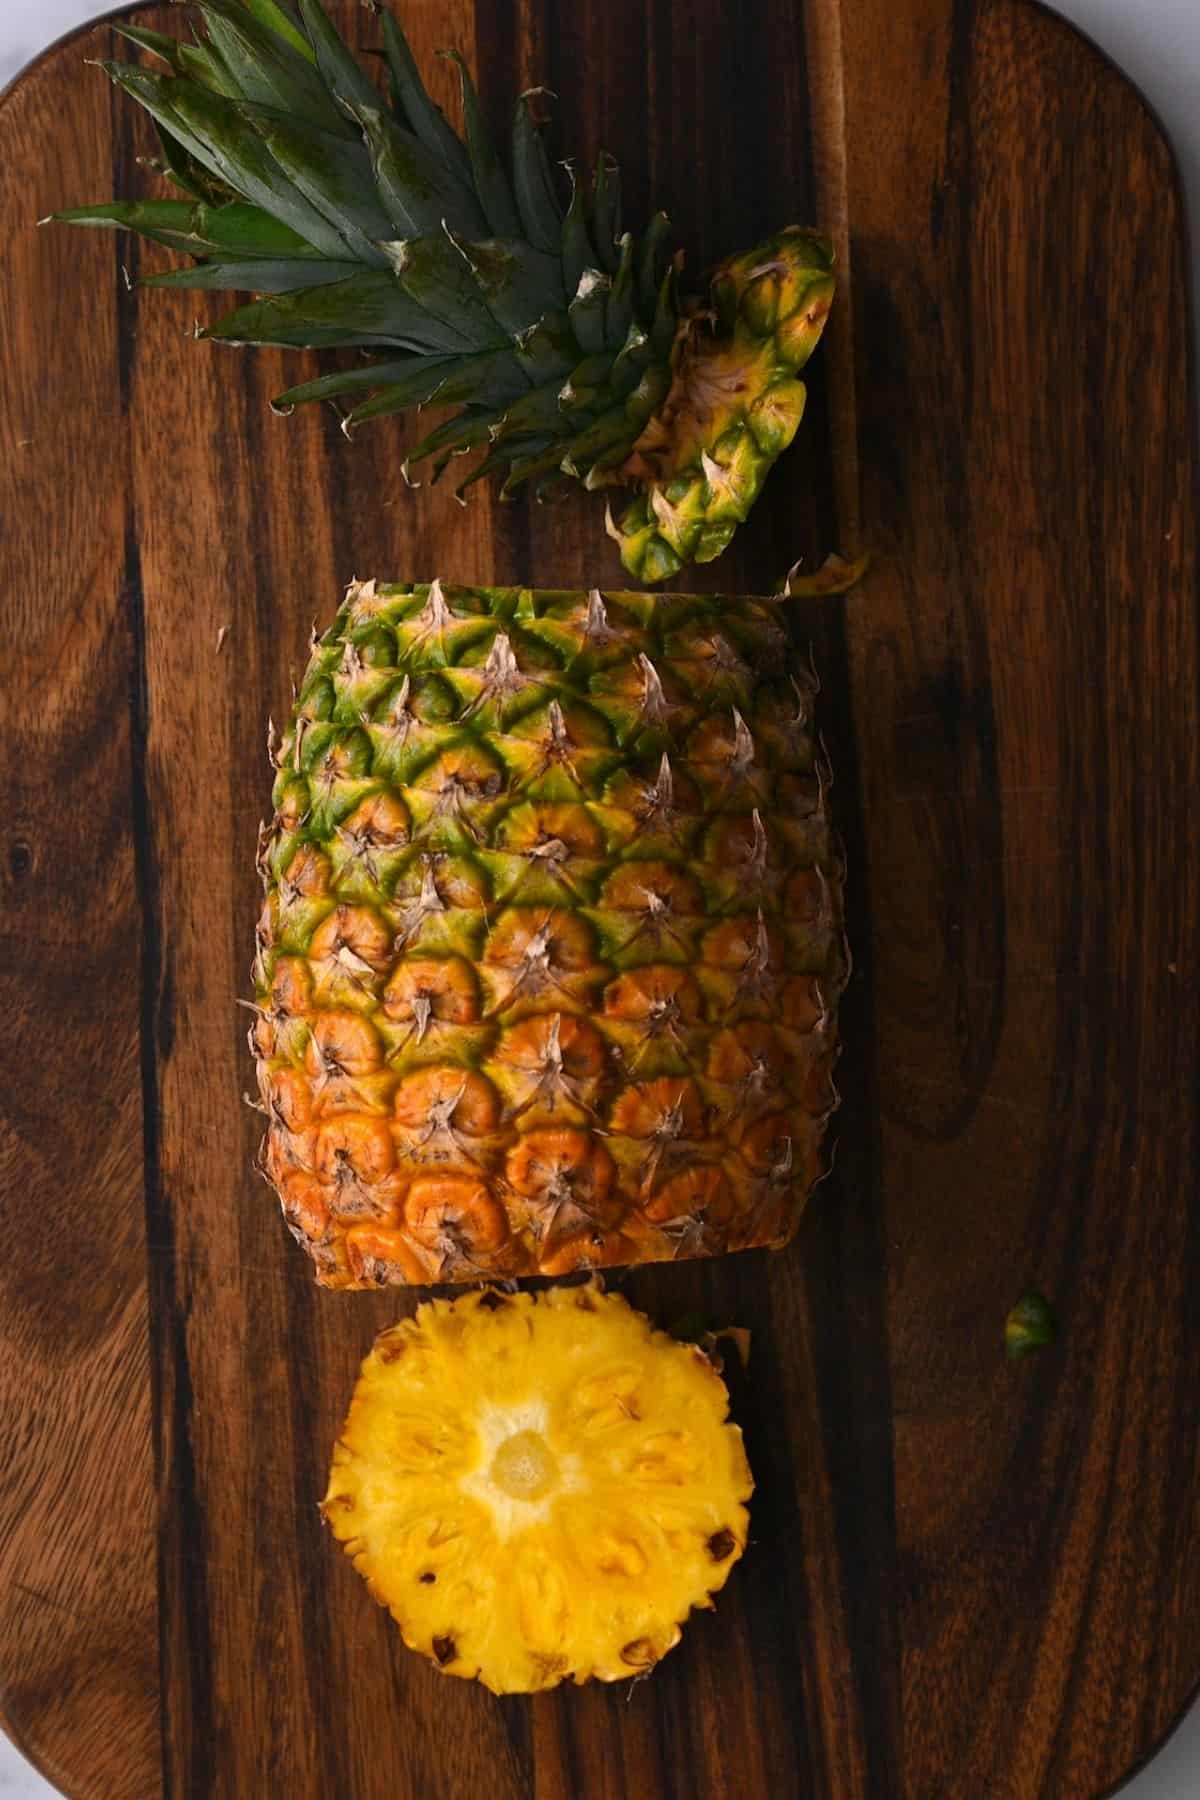 A pineapple with the crown and bottom cut off